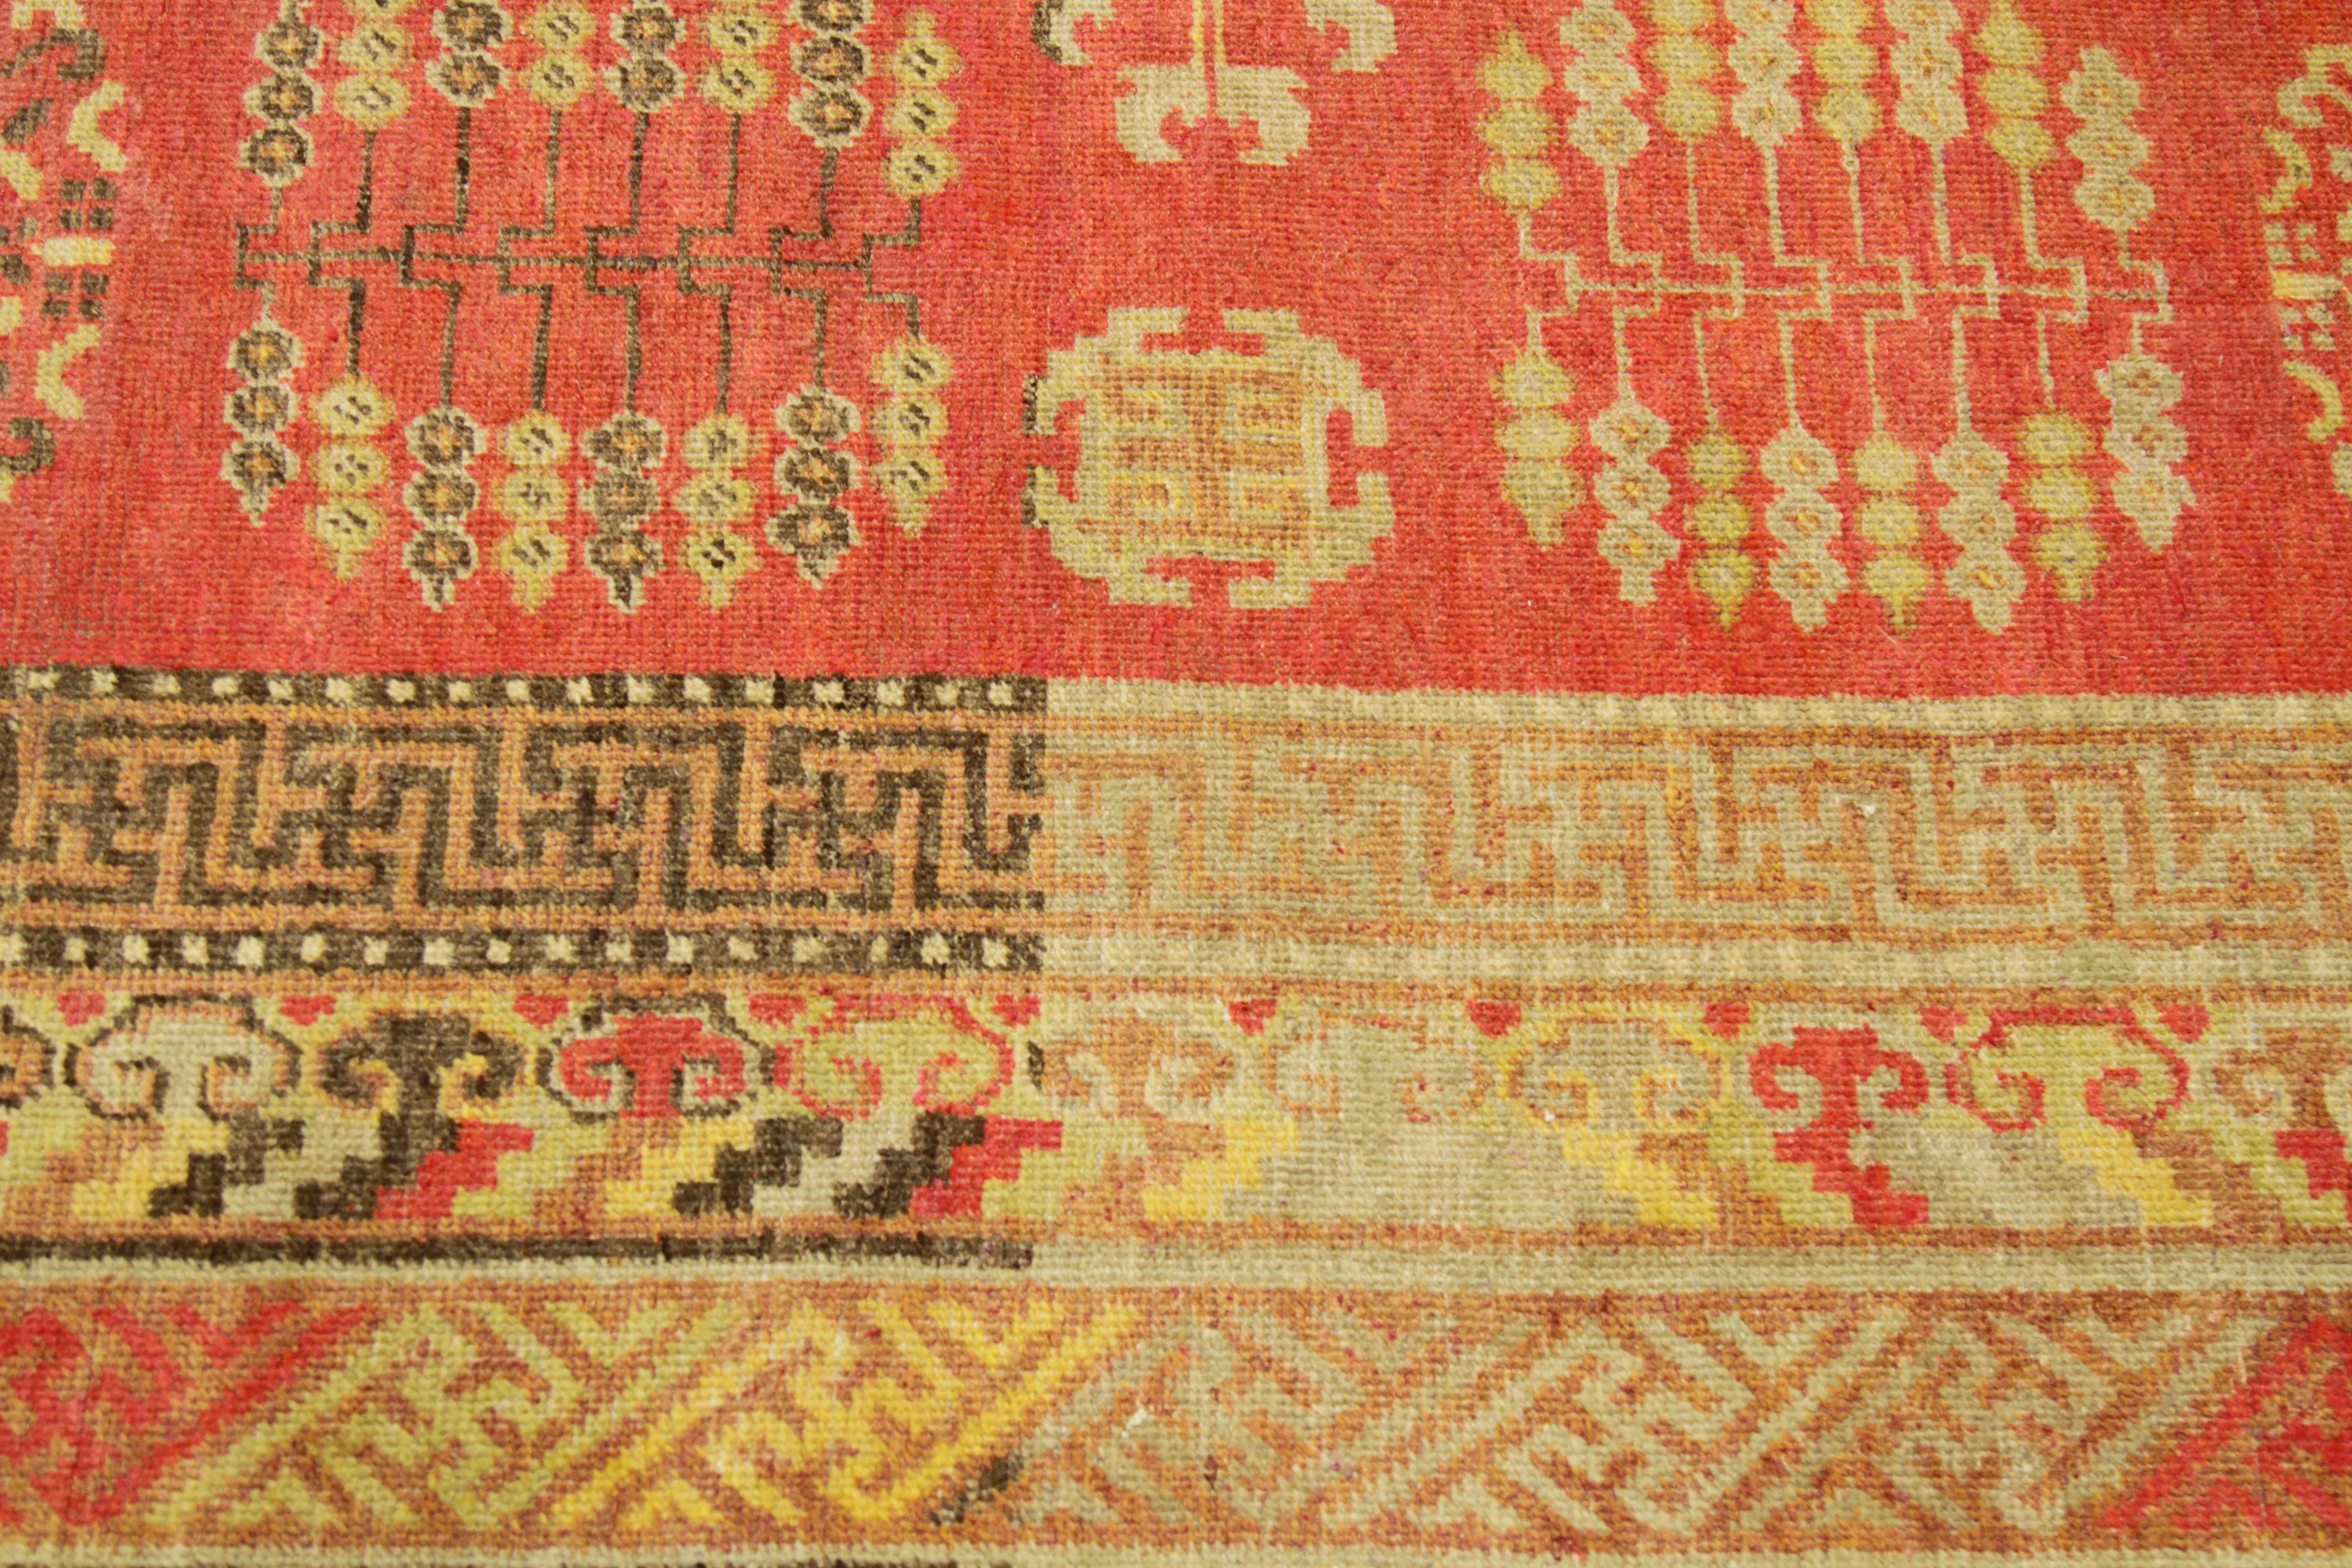 Antique Central Asian Rug Khotan Design with Unique Oriental Patterns circa 1920 In Excellent Condition For Sale In Dallas, TX